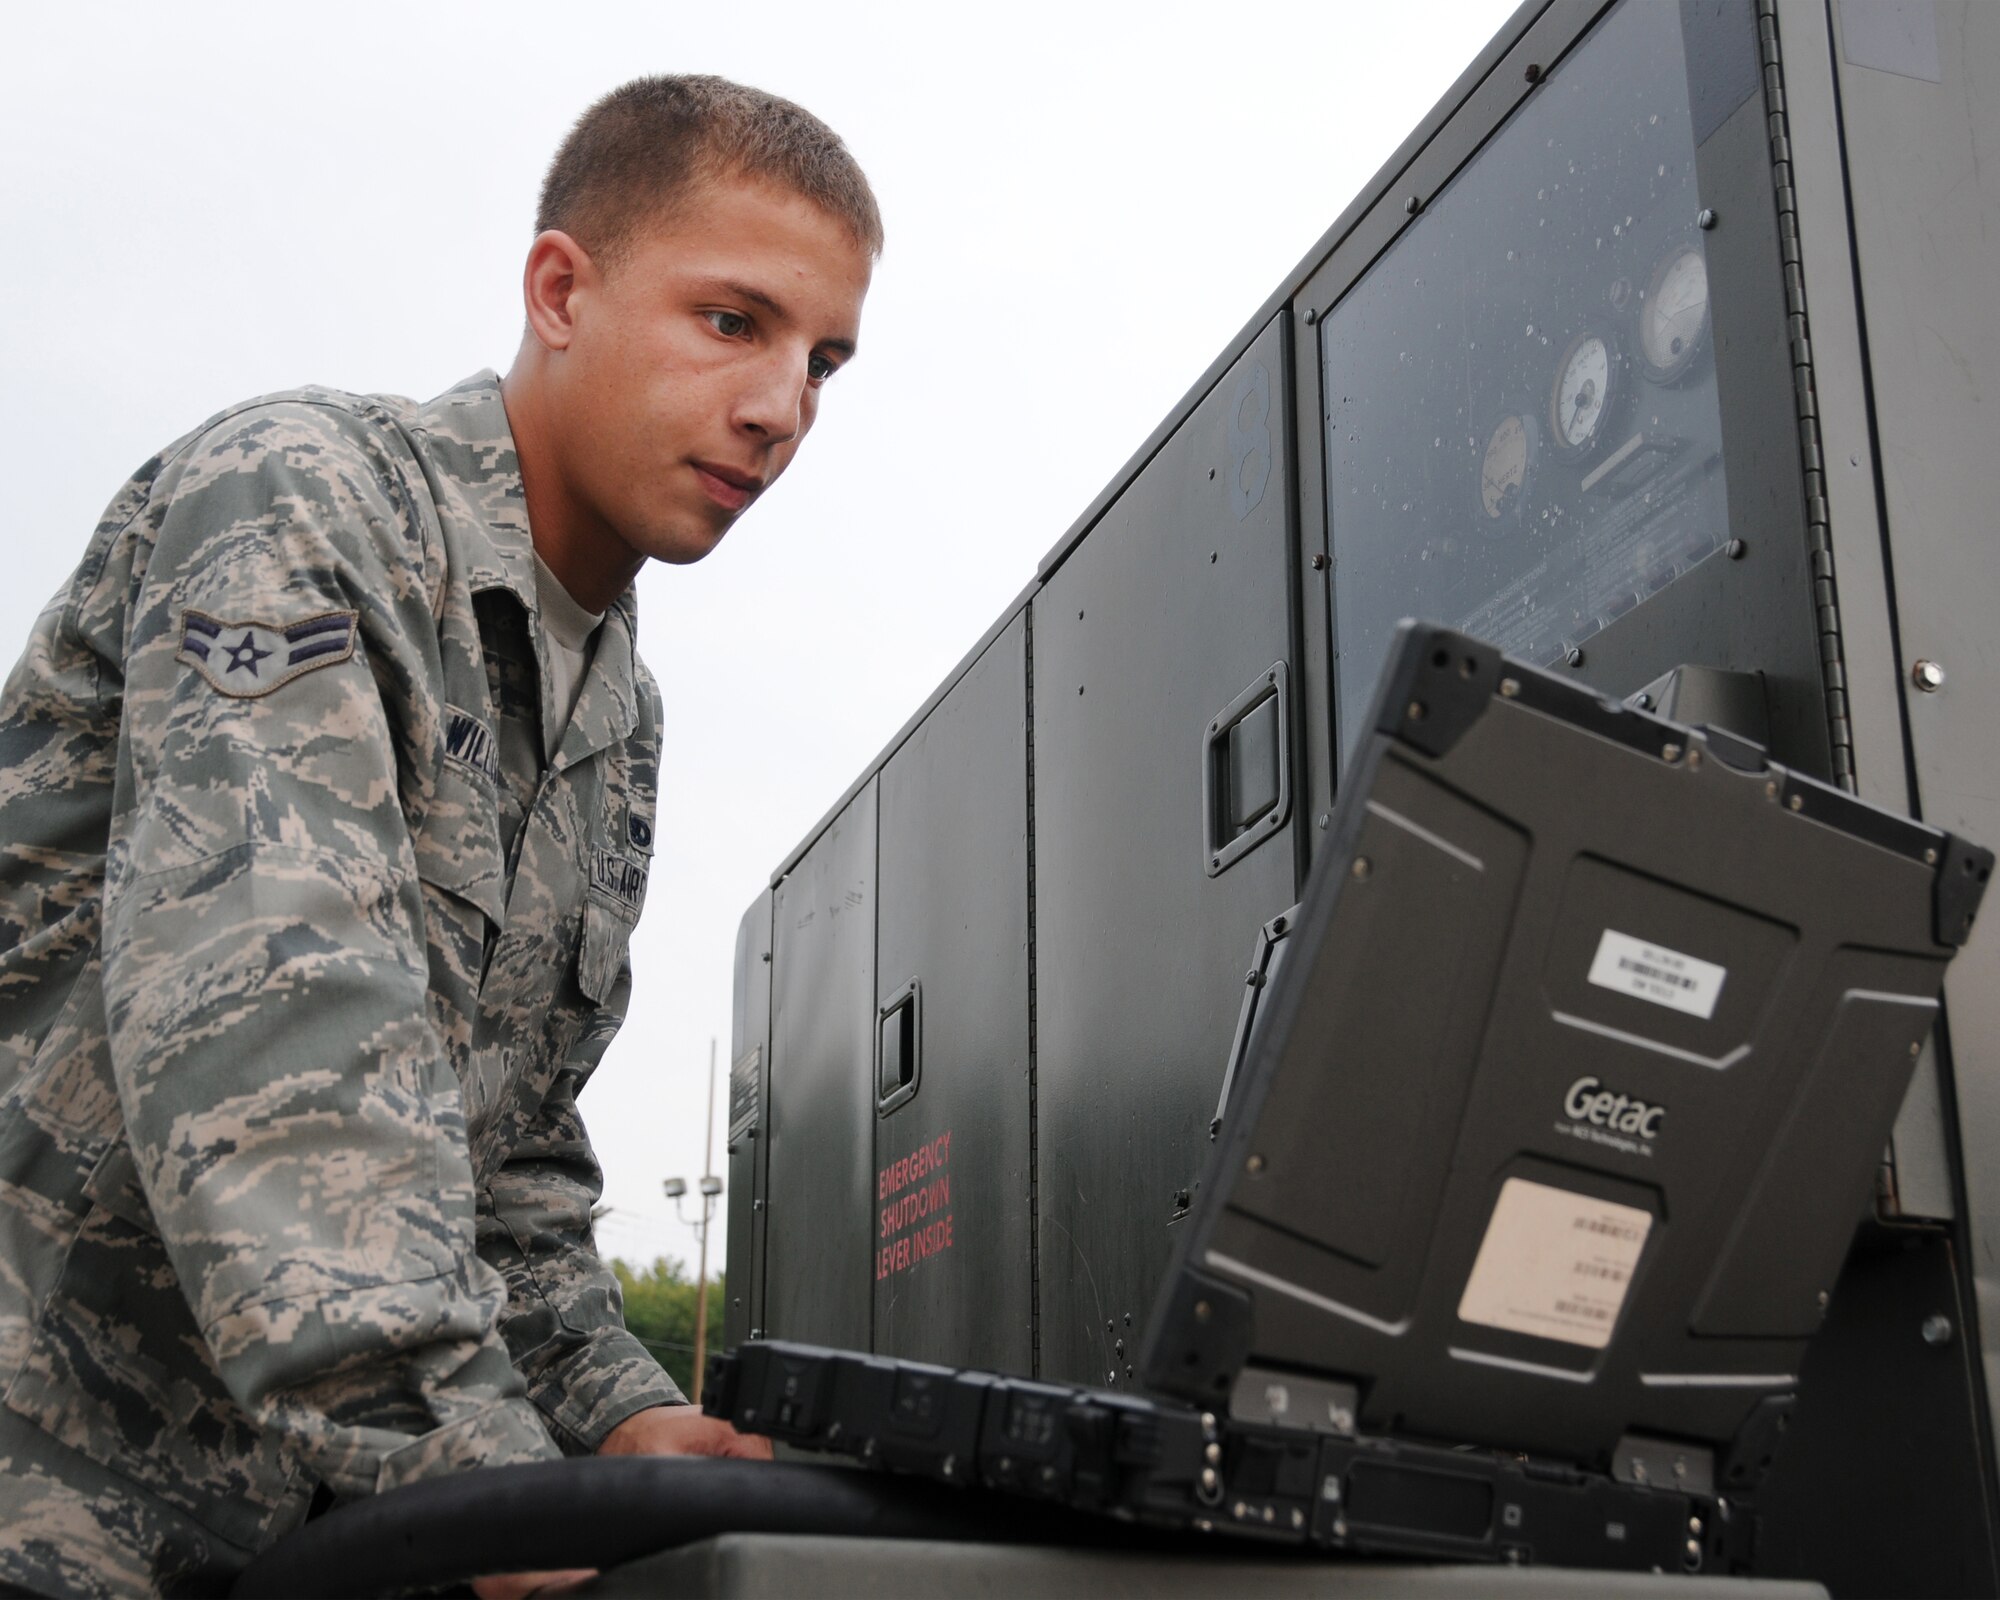 Airman 1st Class Joshua Williams performs a service inspection on aircraft generation equipment, Pease Air National Guard Base, N.H., September 12 2013.  (U.S. Air National Guard photo by Staff Sgt. Curtis J. Lenz)
